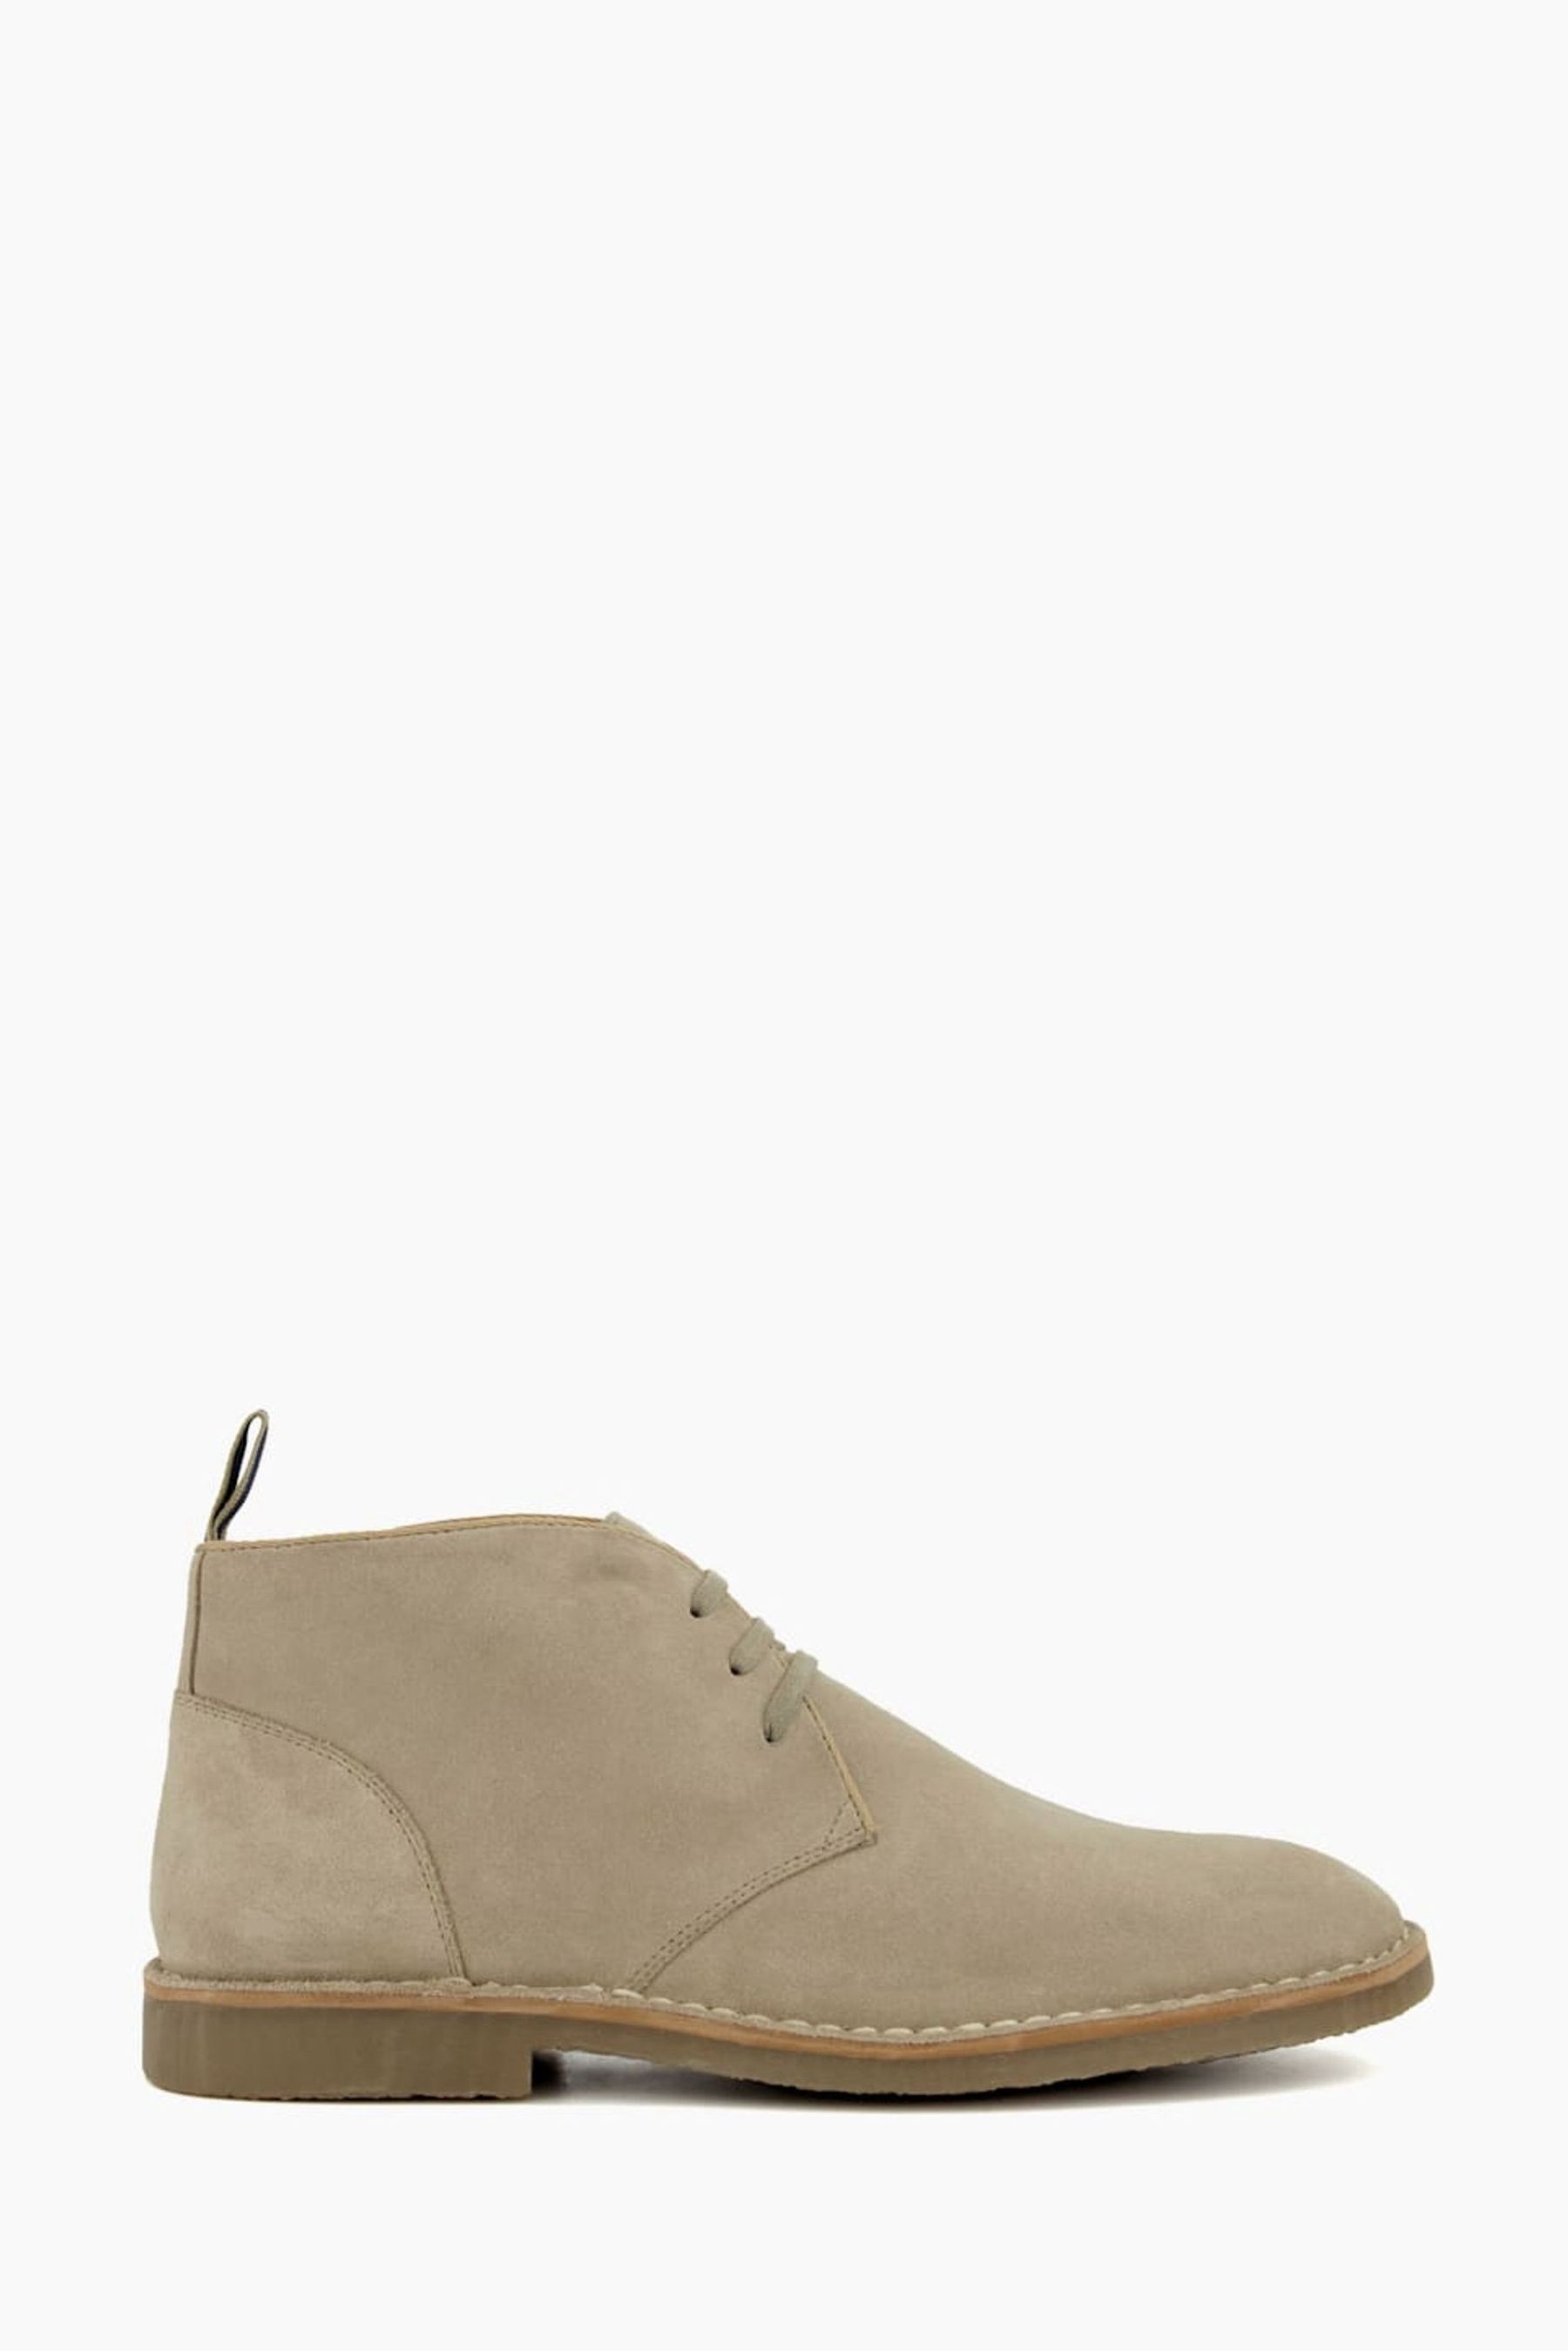 Buy Dune London Cashed Chukka Brown Boots from the Next UK online shop